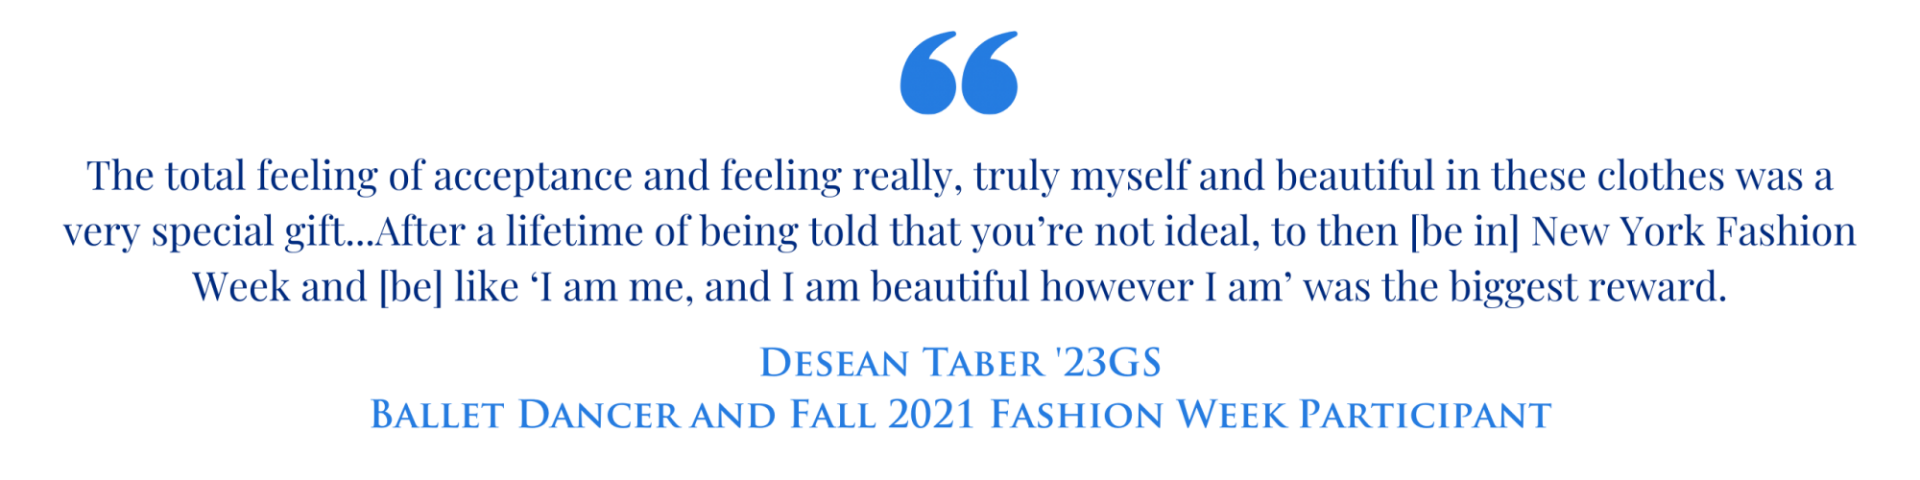 Quote graphic with the text "The total feeling of acceptance and feeling really, truly myself and beautiful in these clothes was a very special gift...After a lifetime of being told that you’re not ideal, to then [be in] New York Fashion Week and [be] like ‘I am me, and I am beautiful however I am’ was the biggest reward." Desean Taber '23GS Ballet Dancer and Fall 2023 Fashion Week Participant